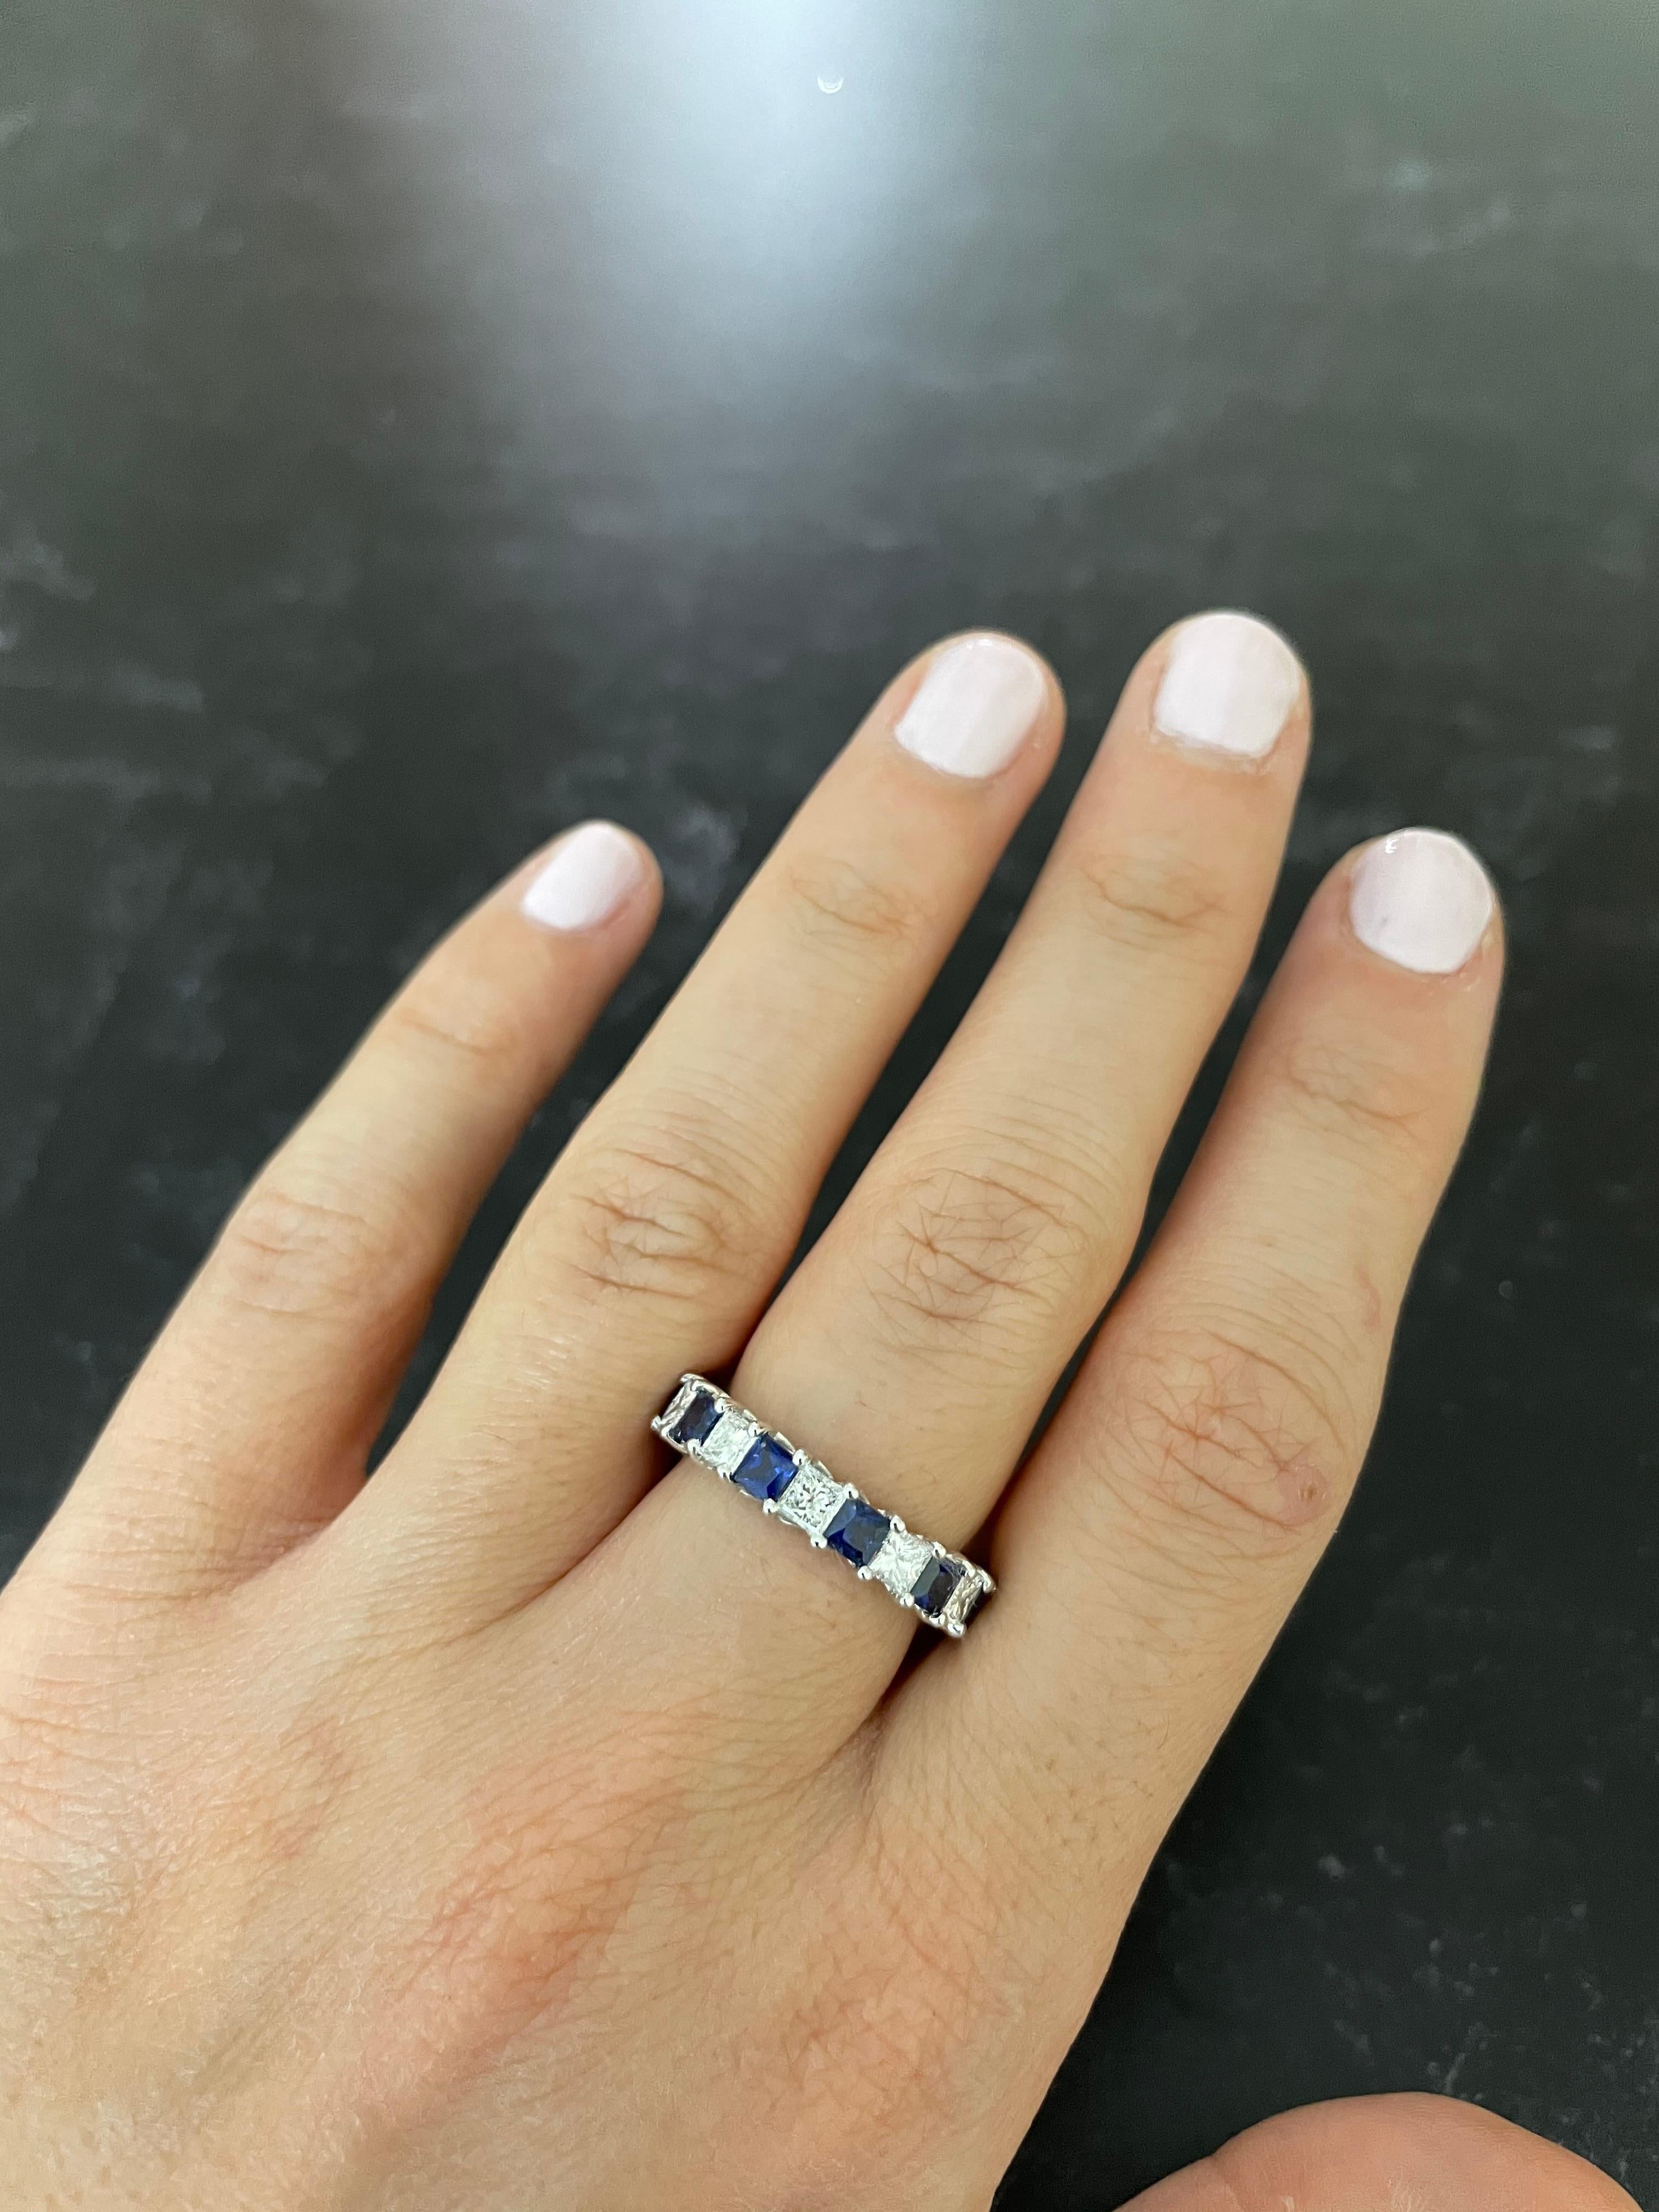 Metal: 18K White Gold
Center Stone: 11 Princess Cut Sapphires at 2.13 ct
Diamond Details: 11 Princess Cut White Diamonds at 1.64 Carats- Clarity: VS / Color H
Ring size: 5

Undeniably rare, colorfully bright, and promised to last a lifetime,